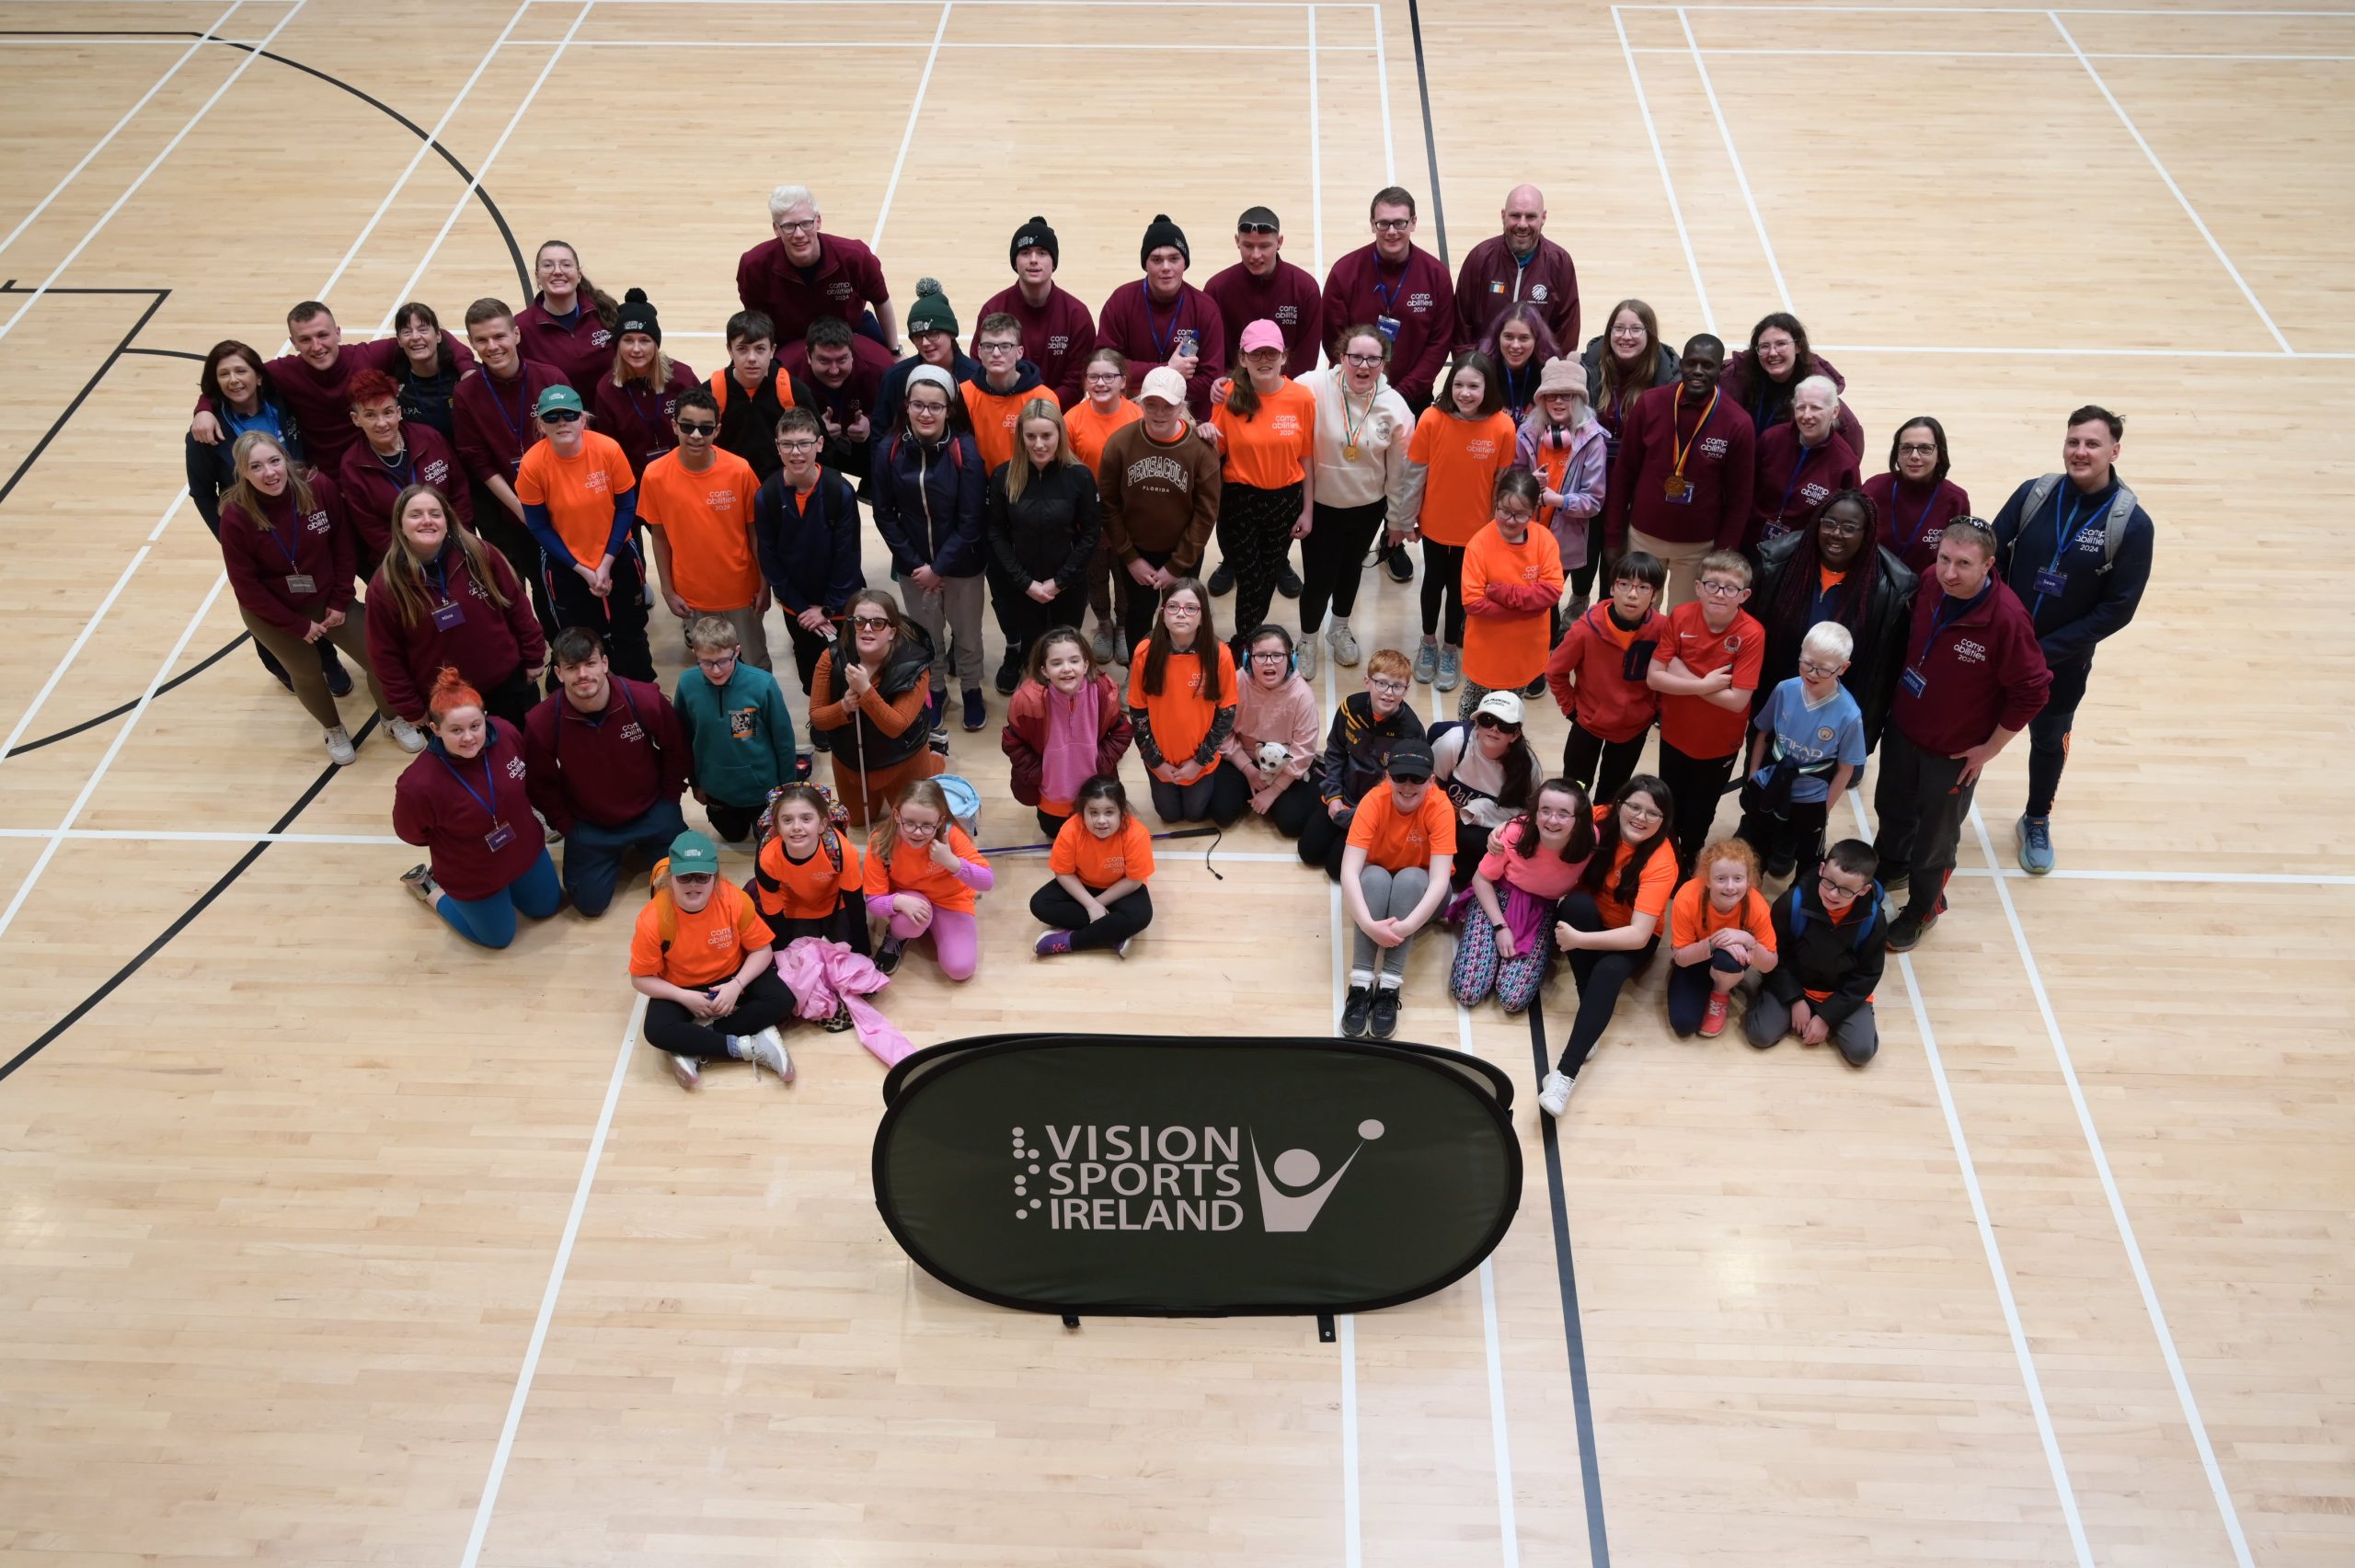 A group photo of all camp volunteers and participants taken in a sports hall from above